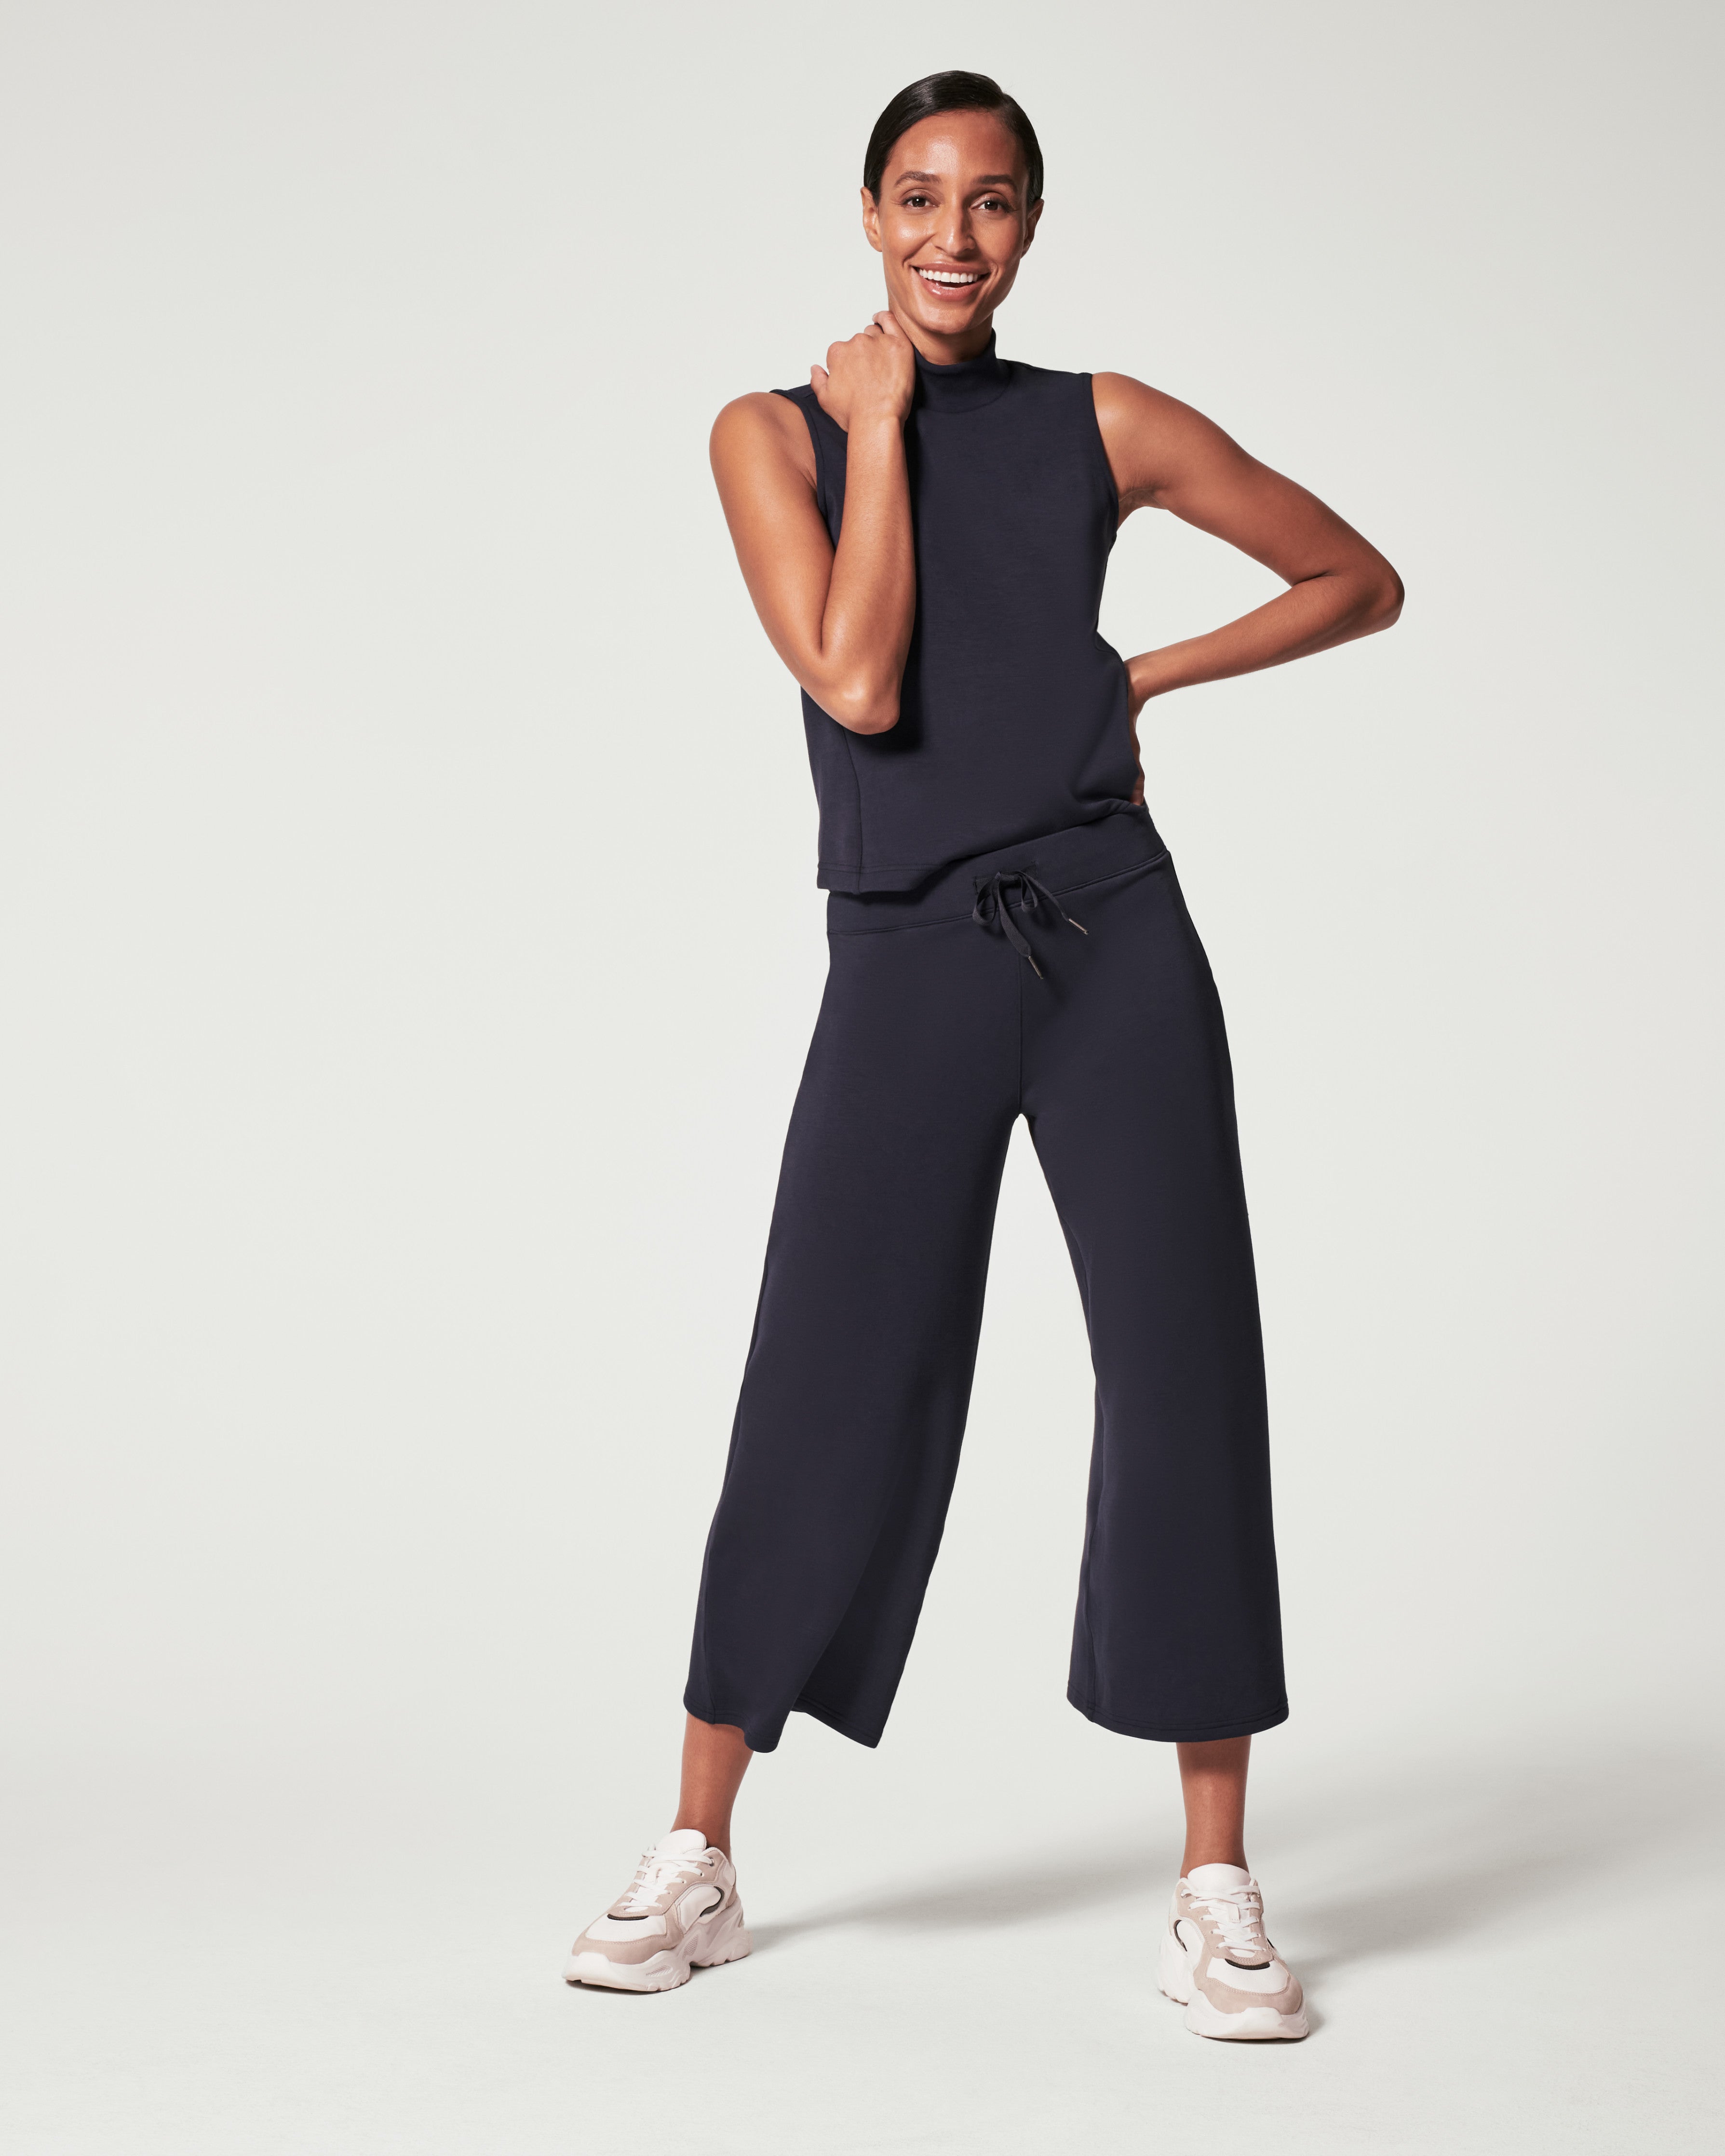 Spanx AirEssentials Wide Leg Pant